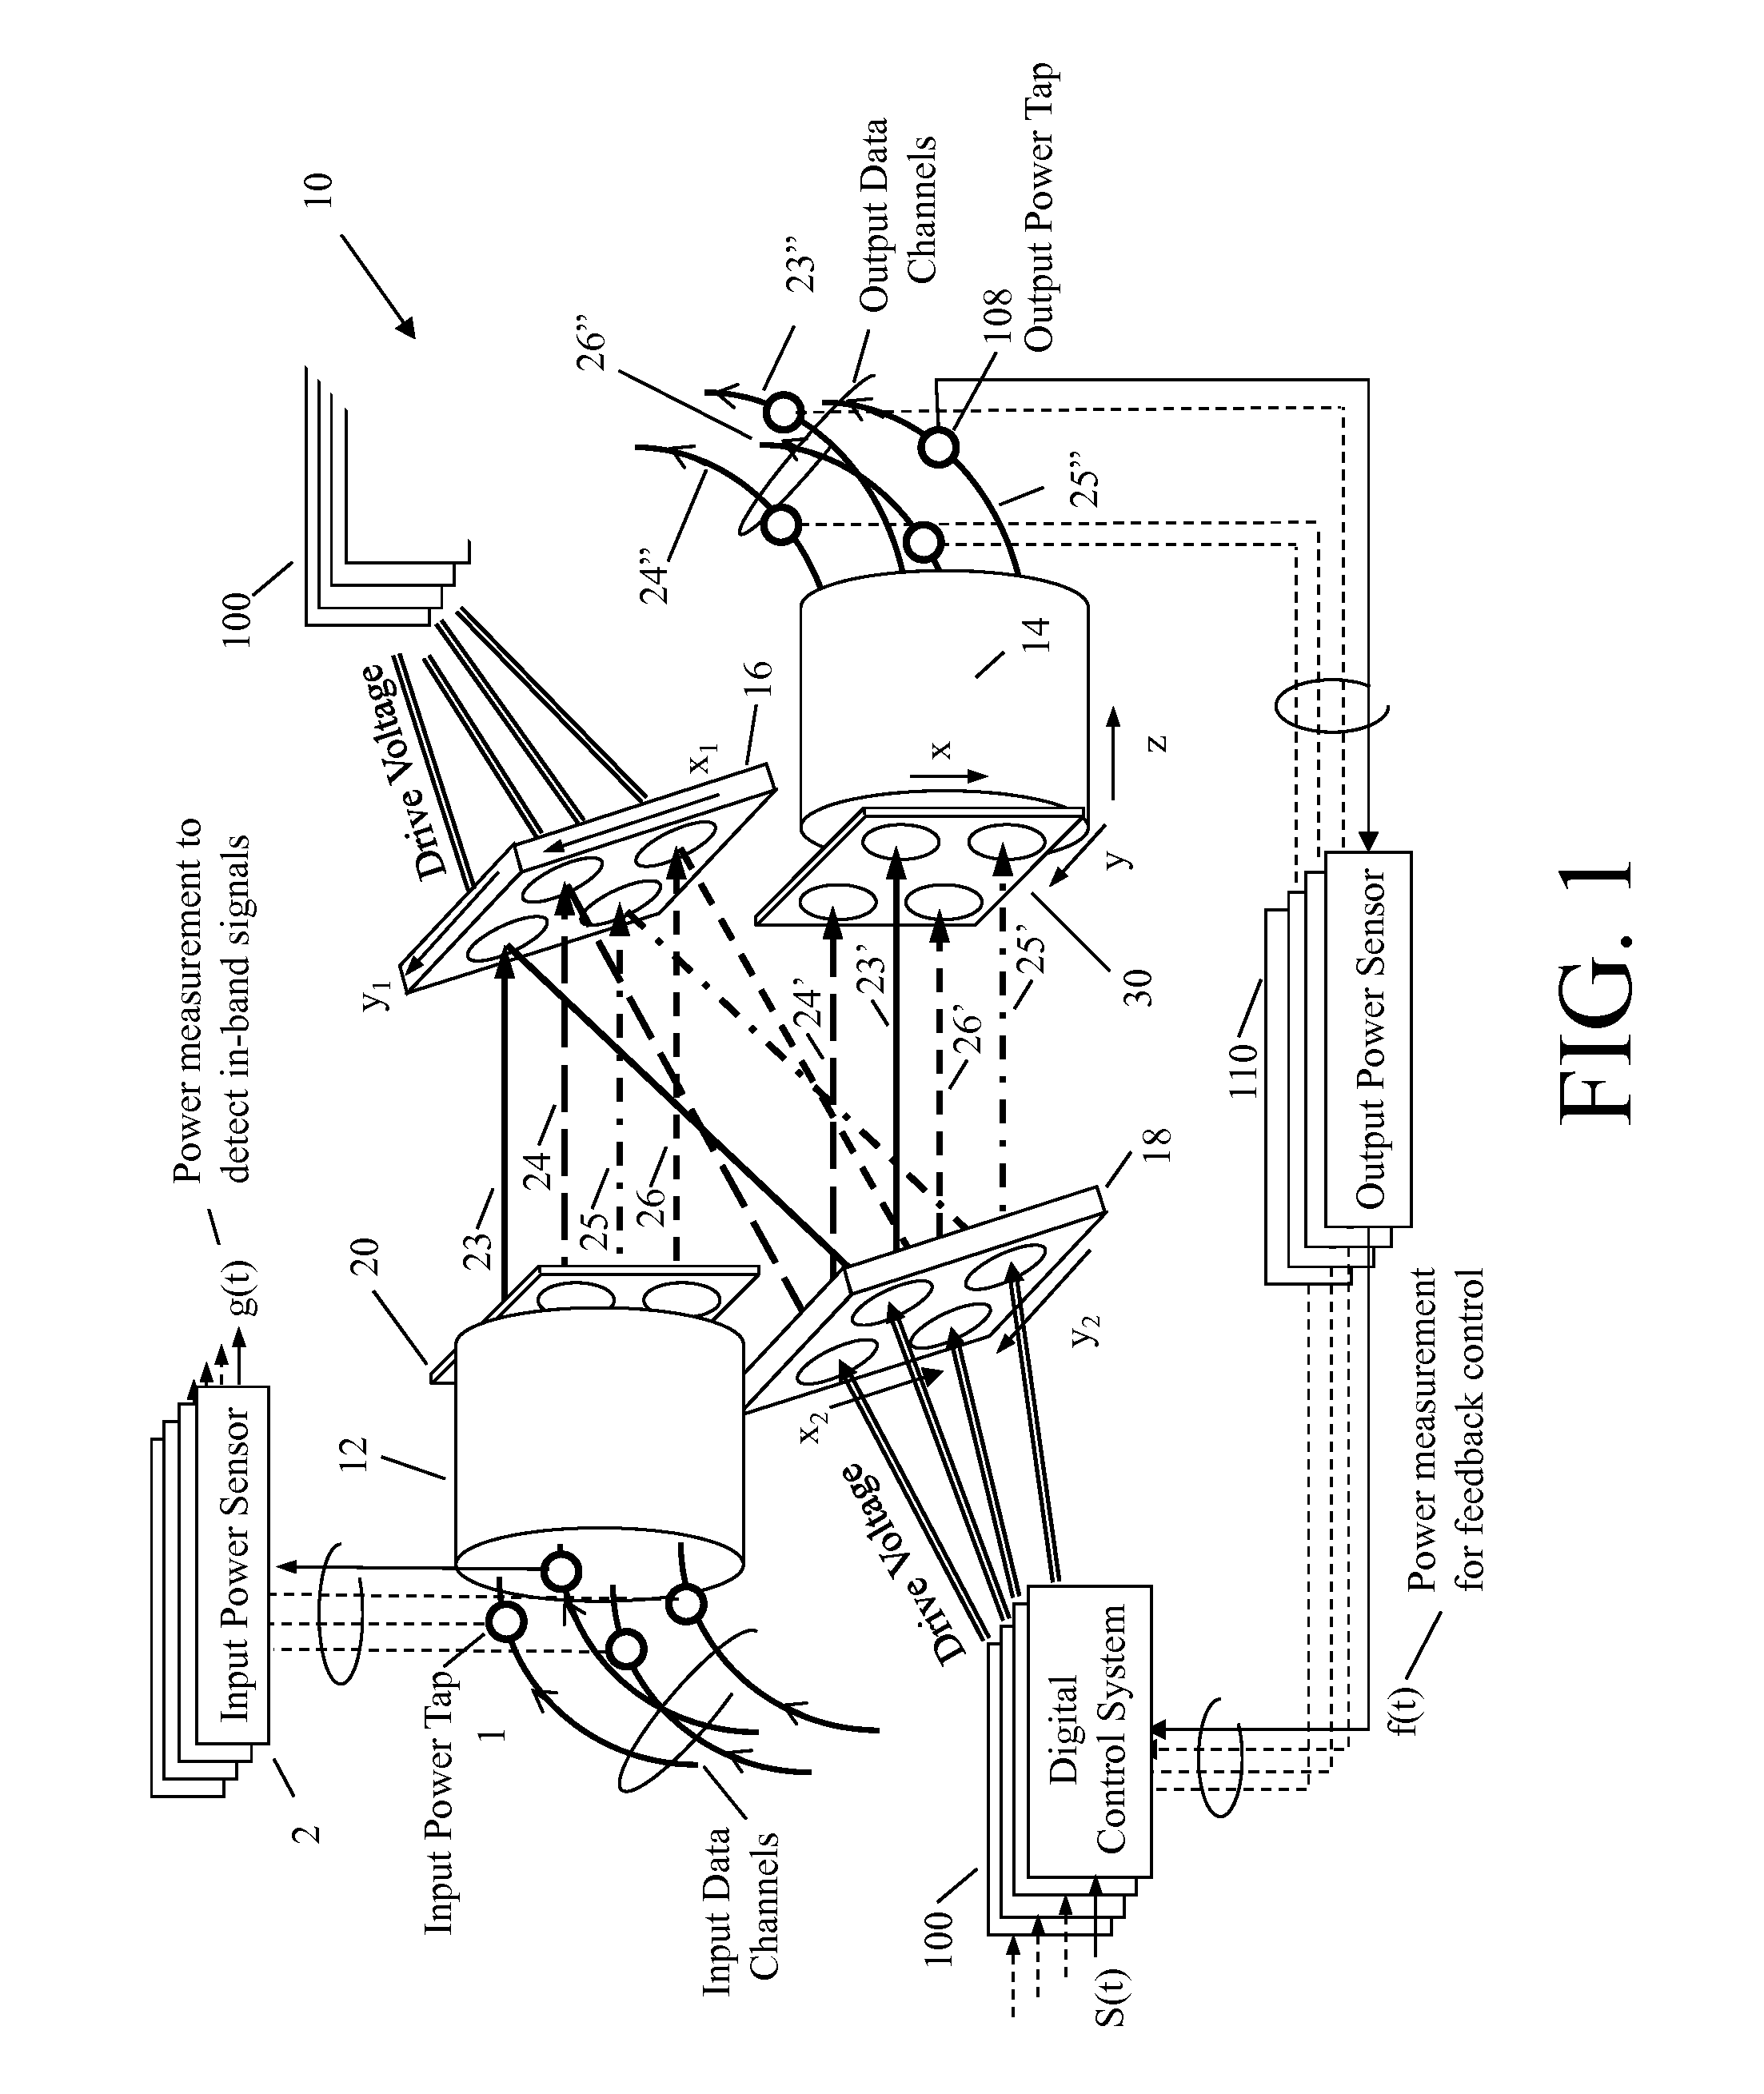 In-band signaling in optical cross-connect switch using frequency modulation